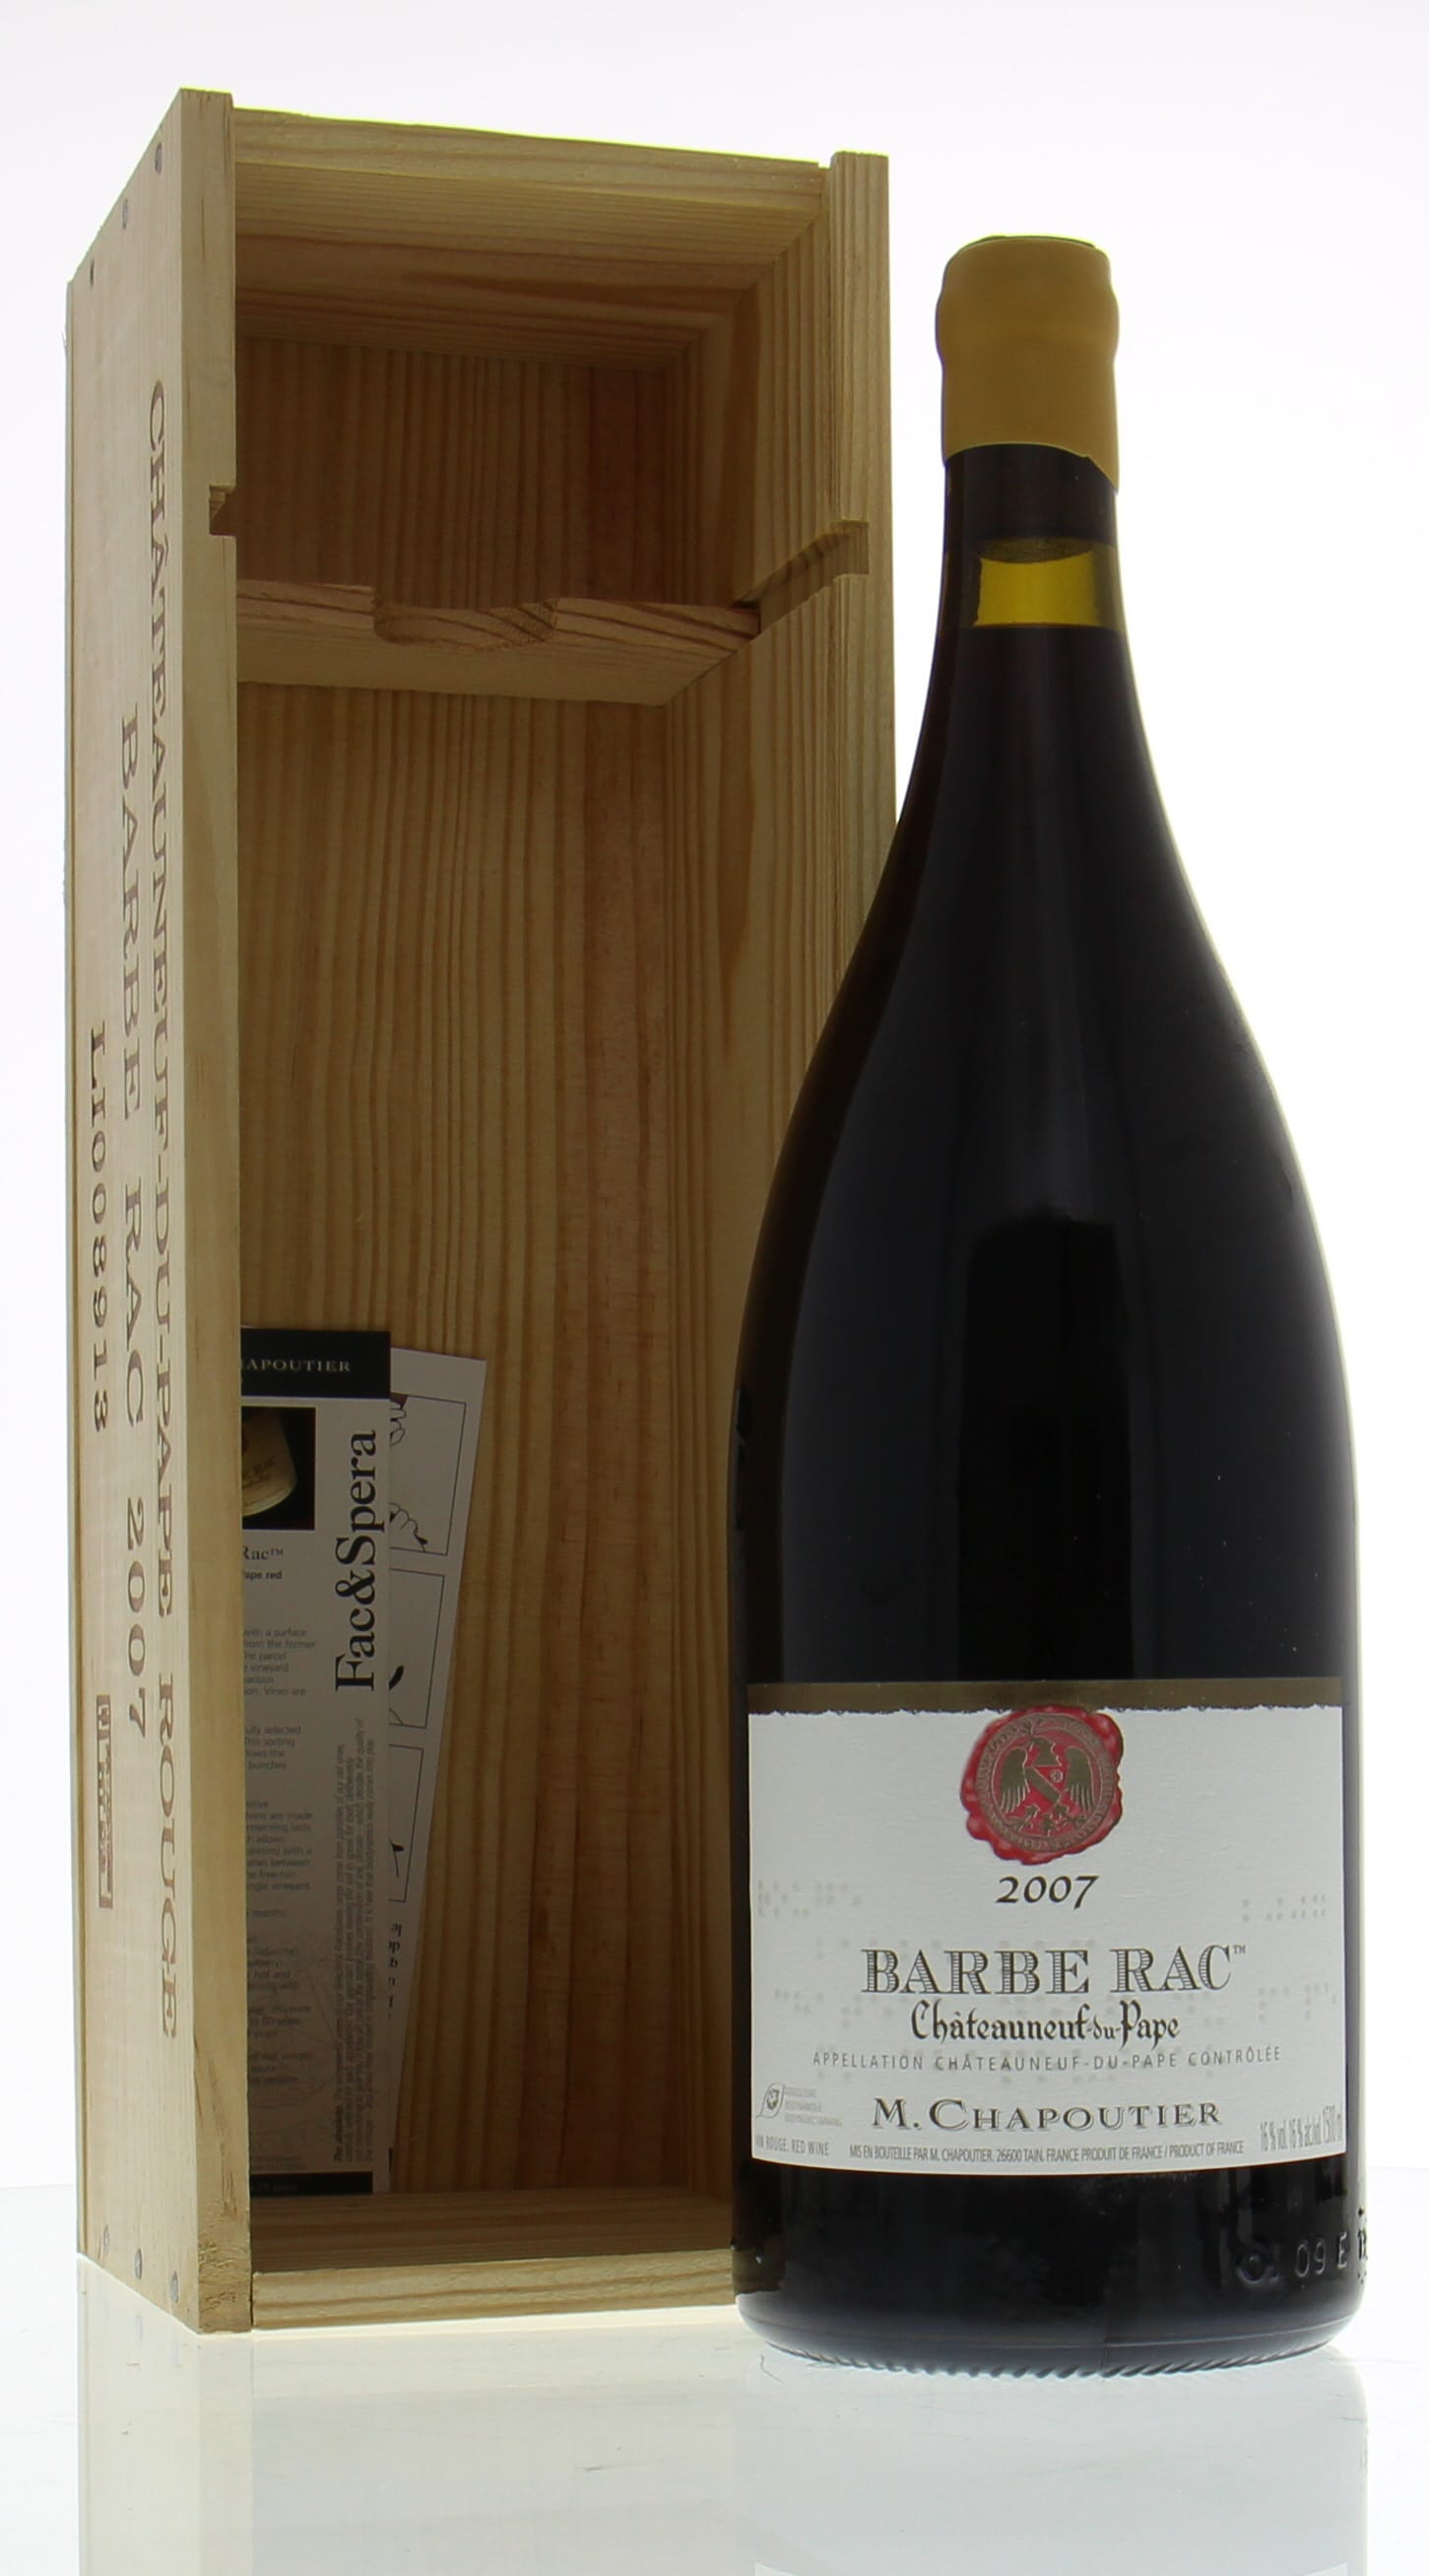 Chapoutier - Chateauneuf du Pape Barbe Rac 2007 From Original Wooden Case